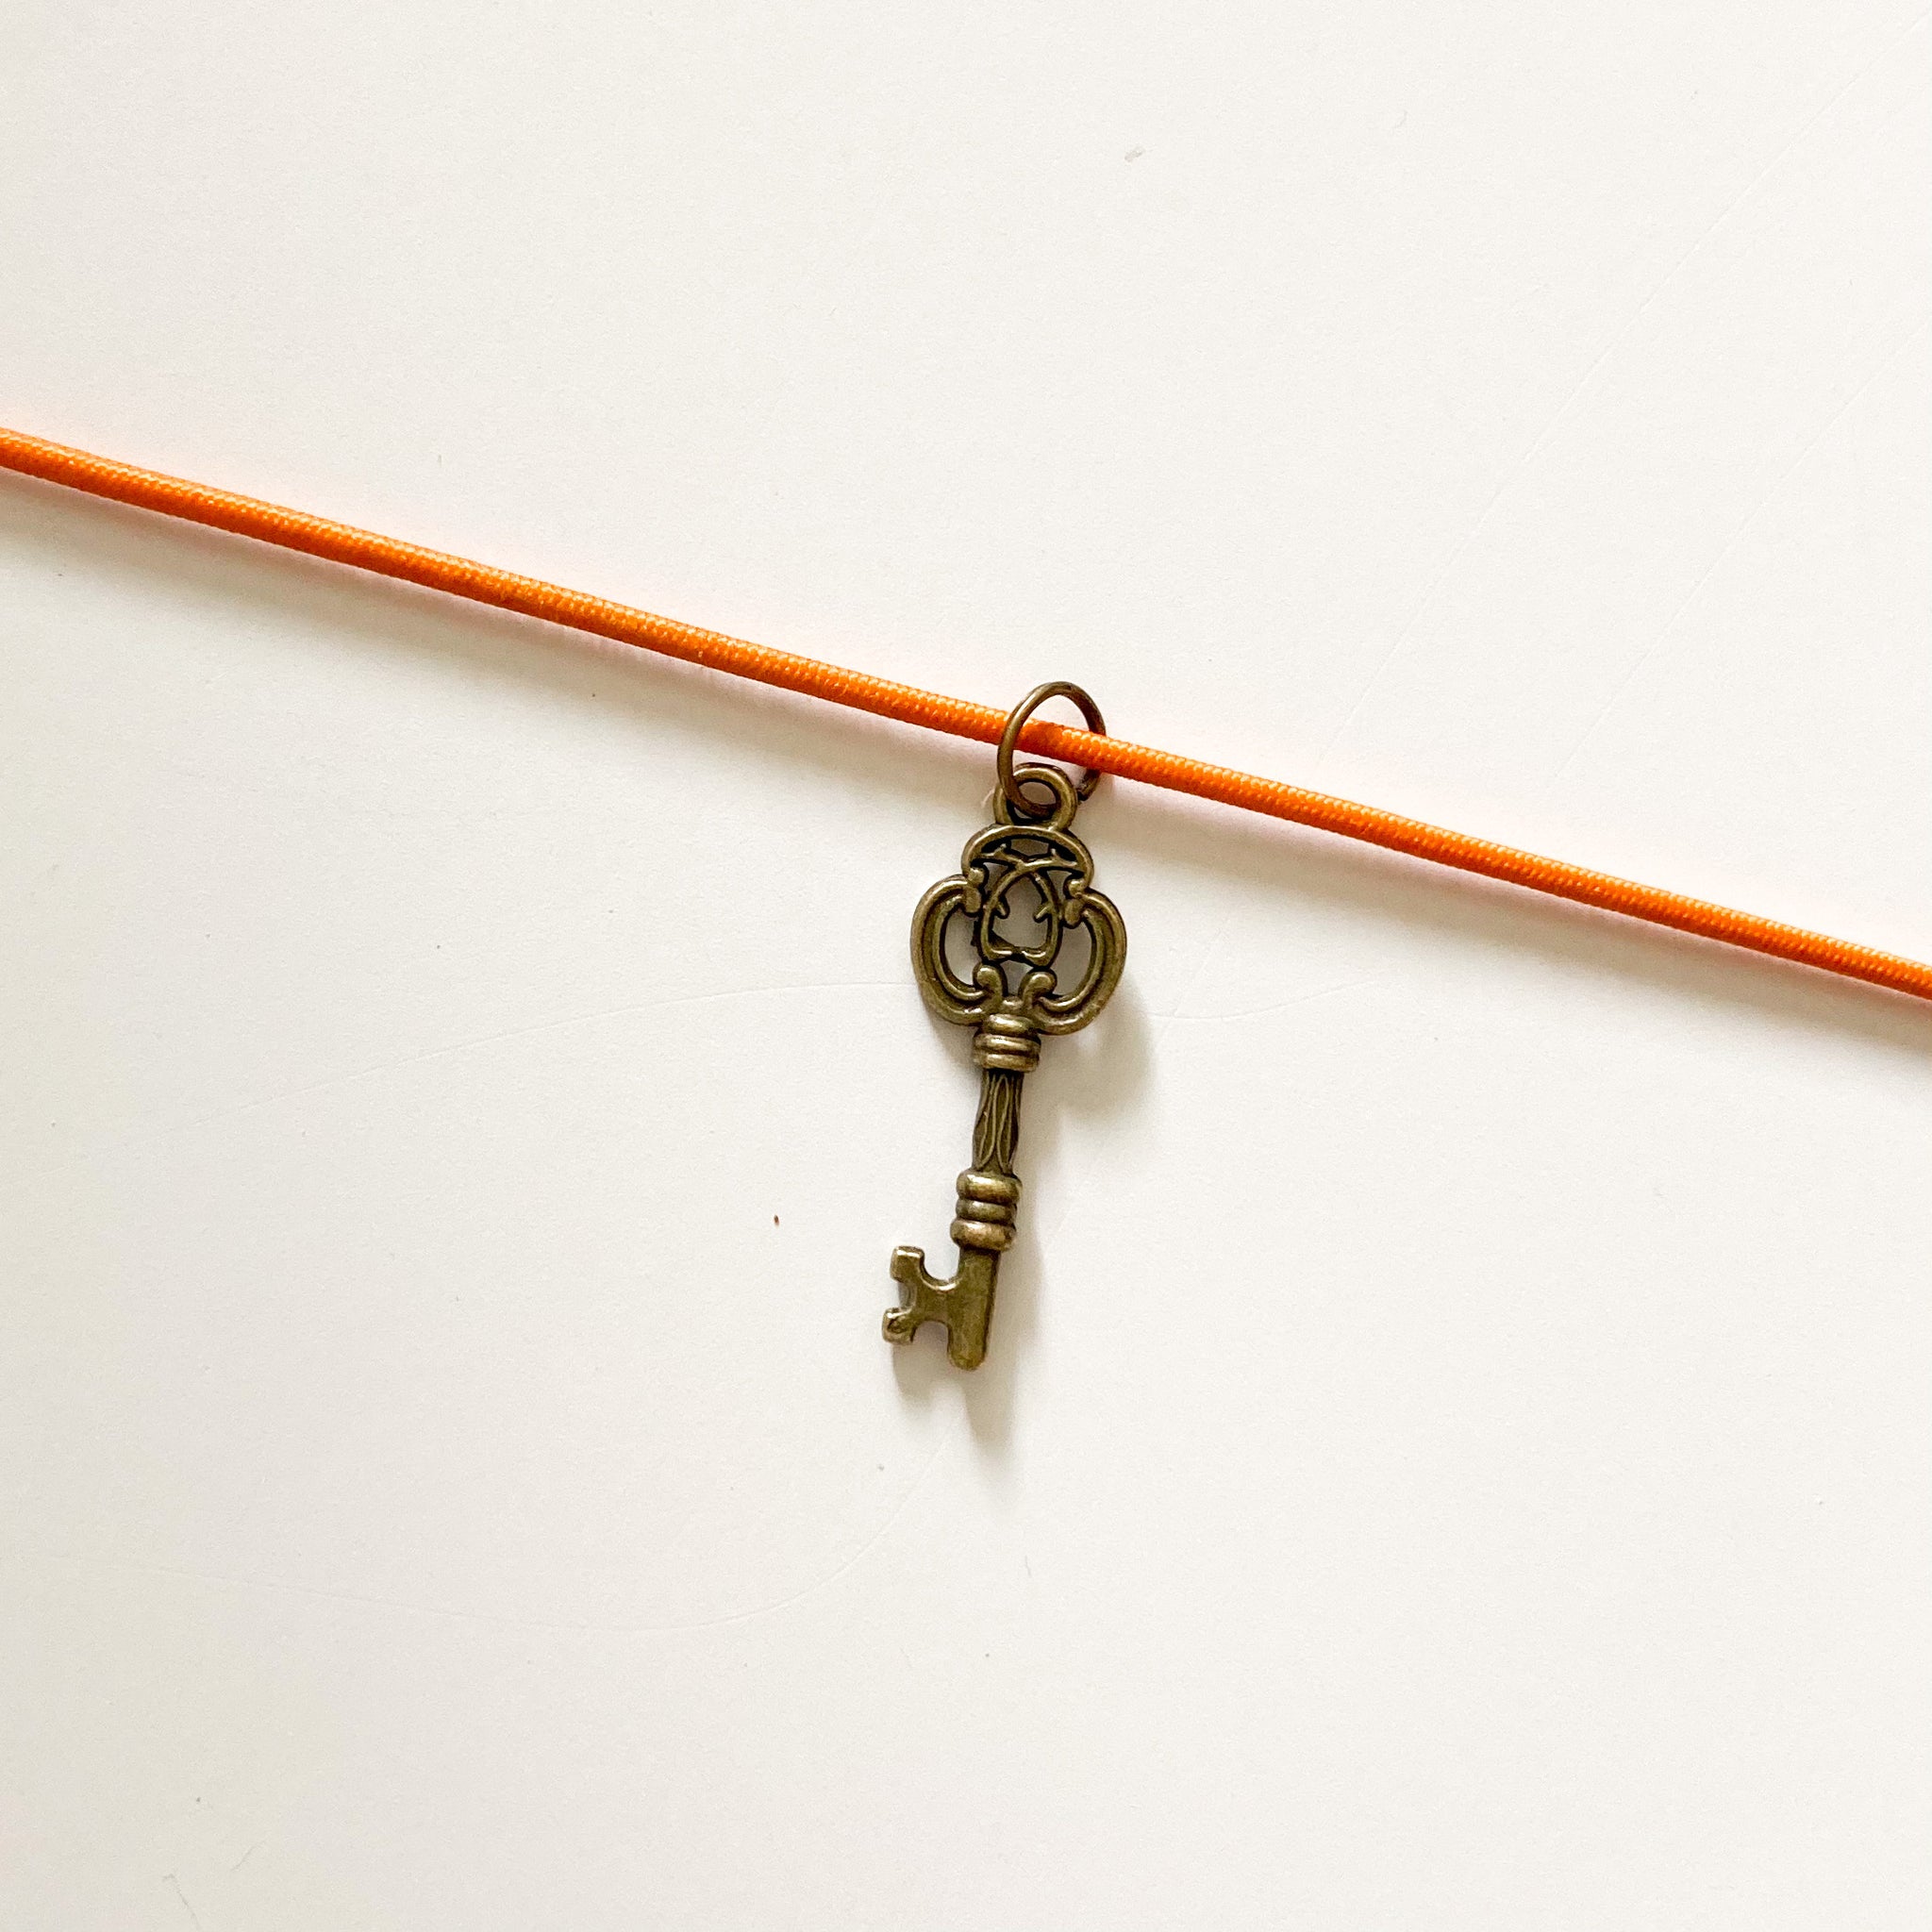 ANTIQUE KEY - SPECIALTY CHARM